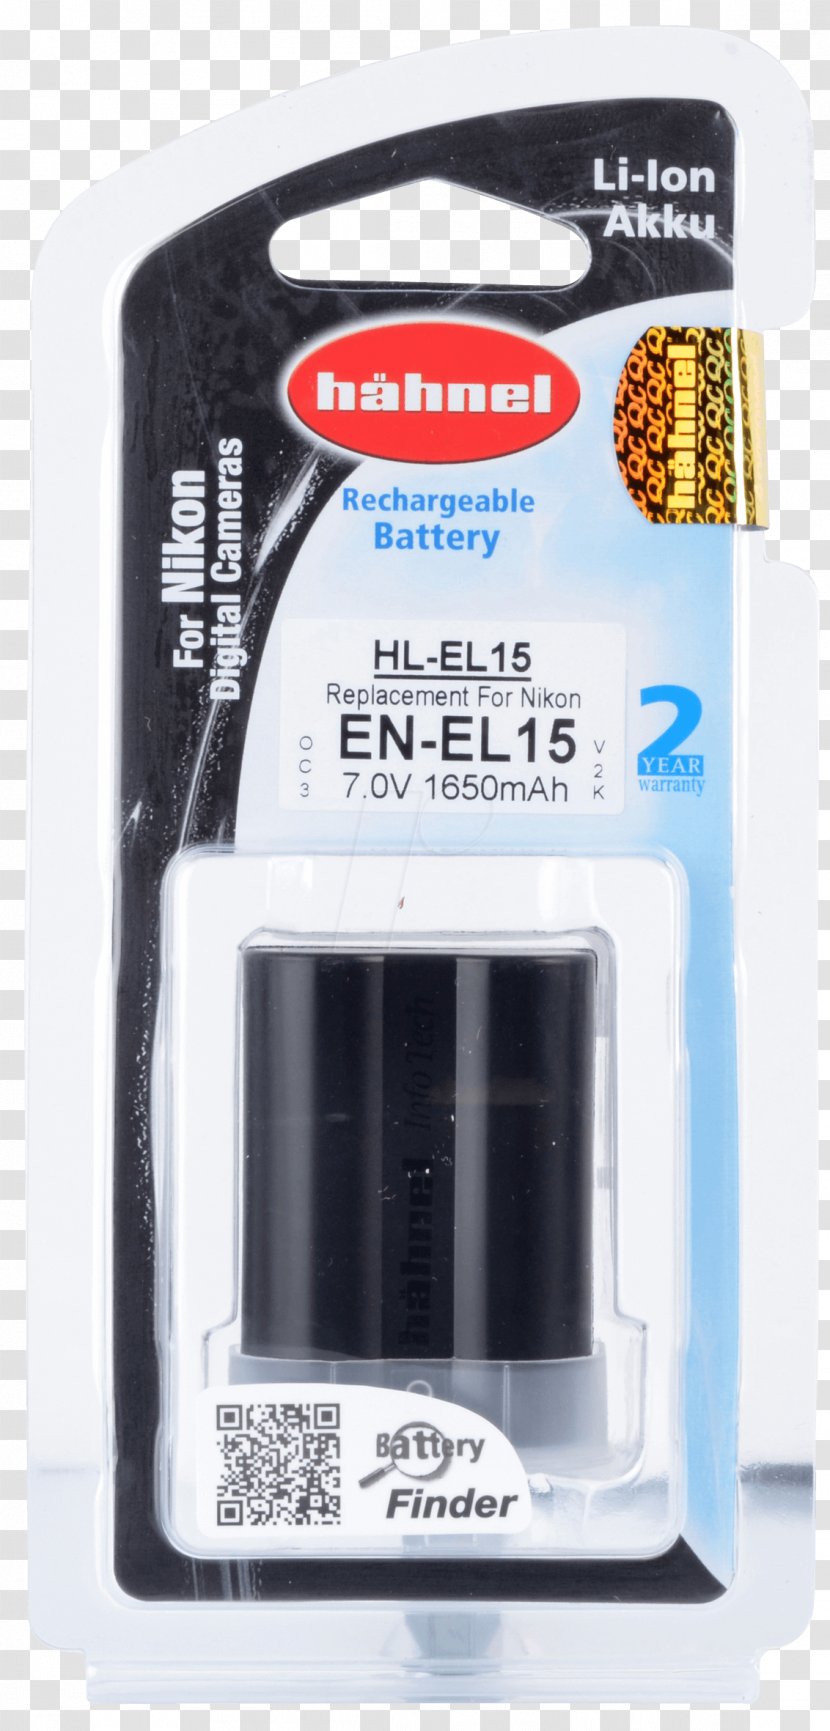 Lithium-ion Battery Electric Hahnel Rechargeable Fujifilm - Camera - Lithium Transparent PNG